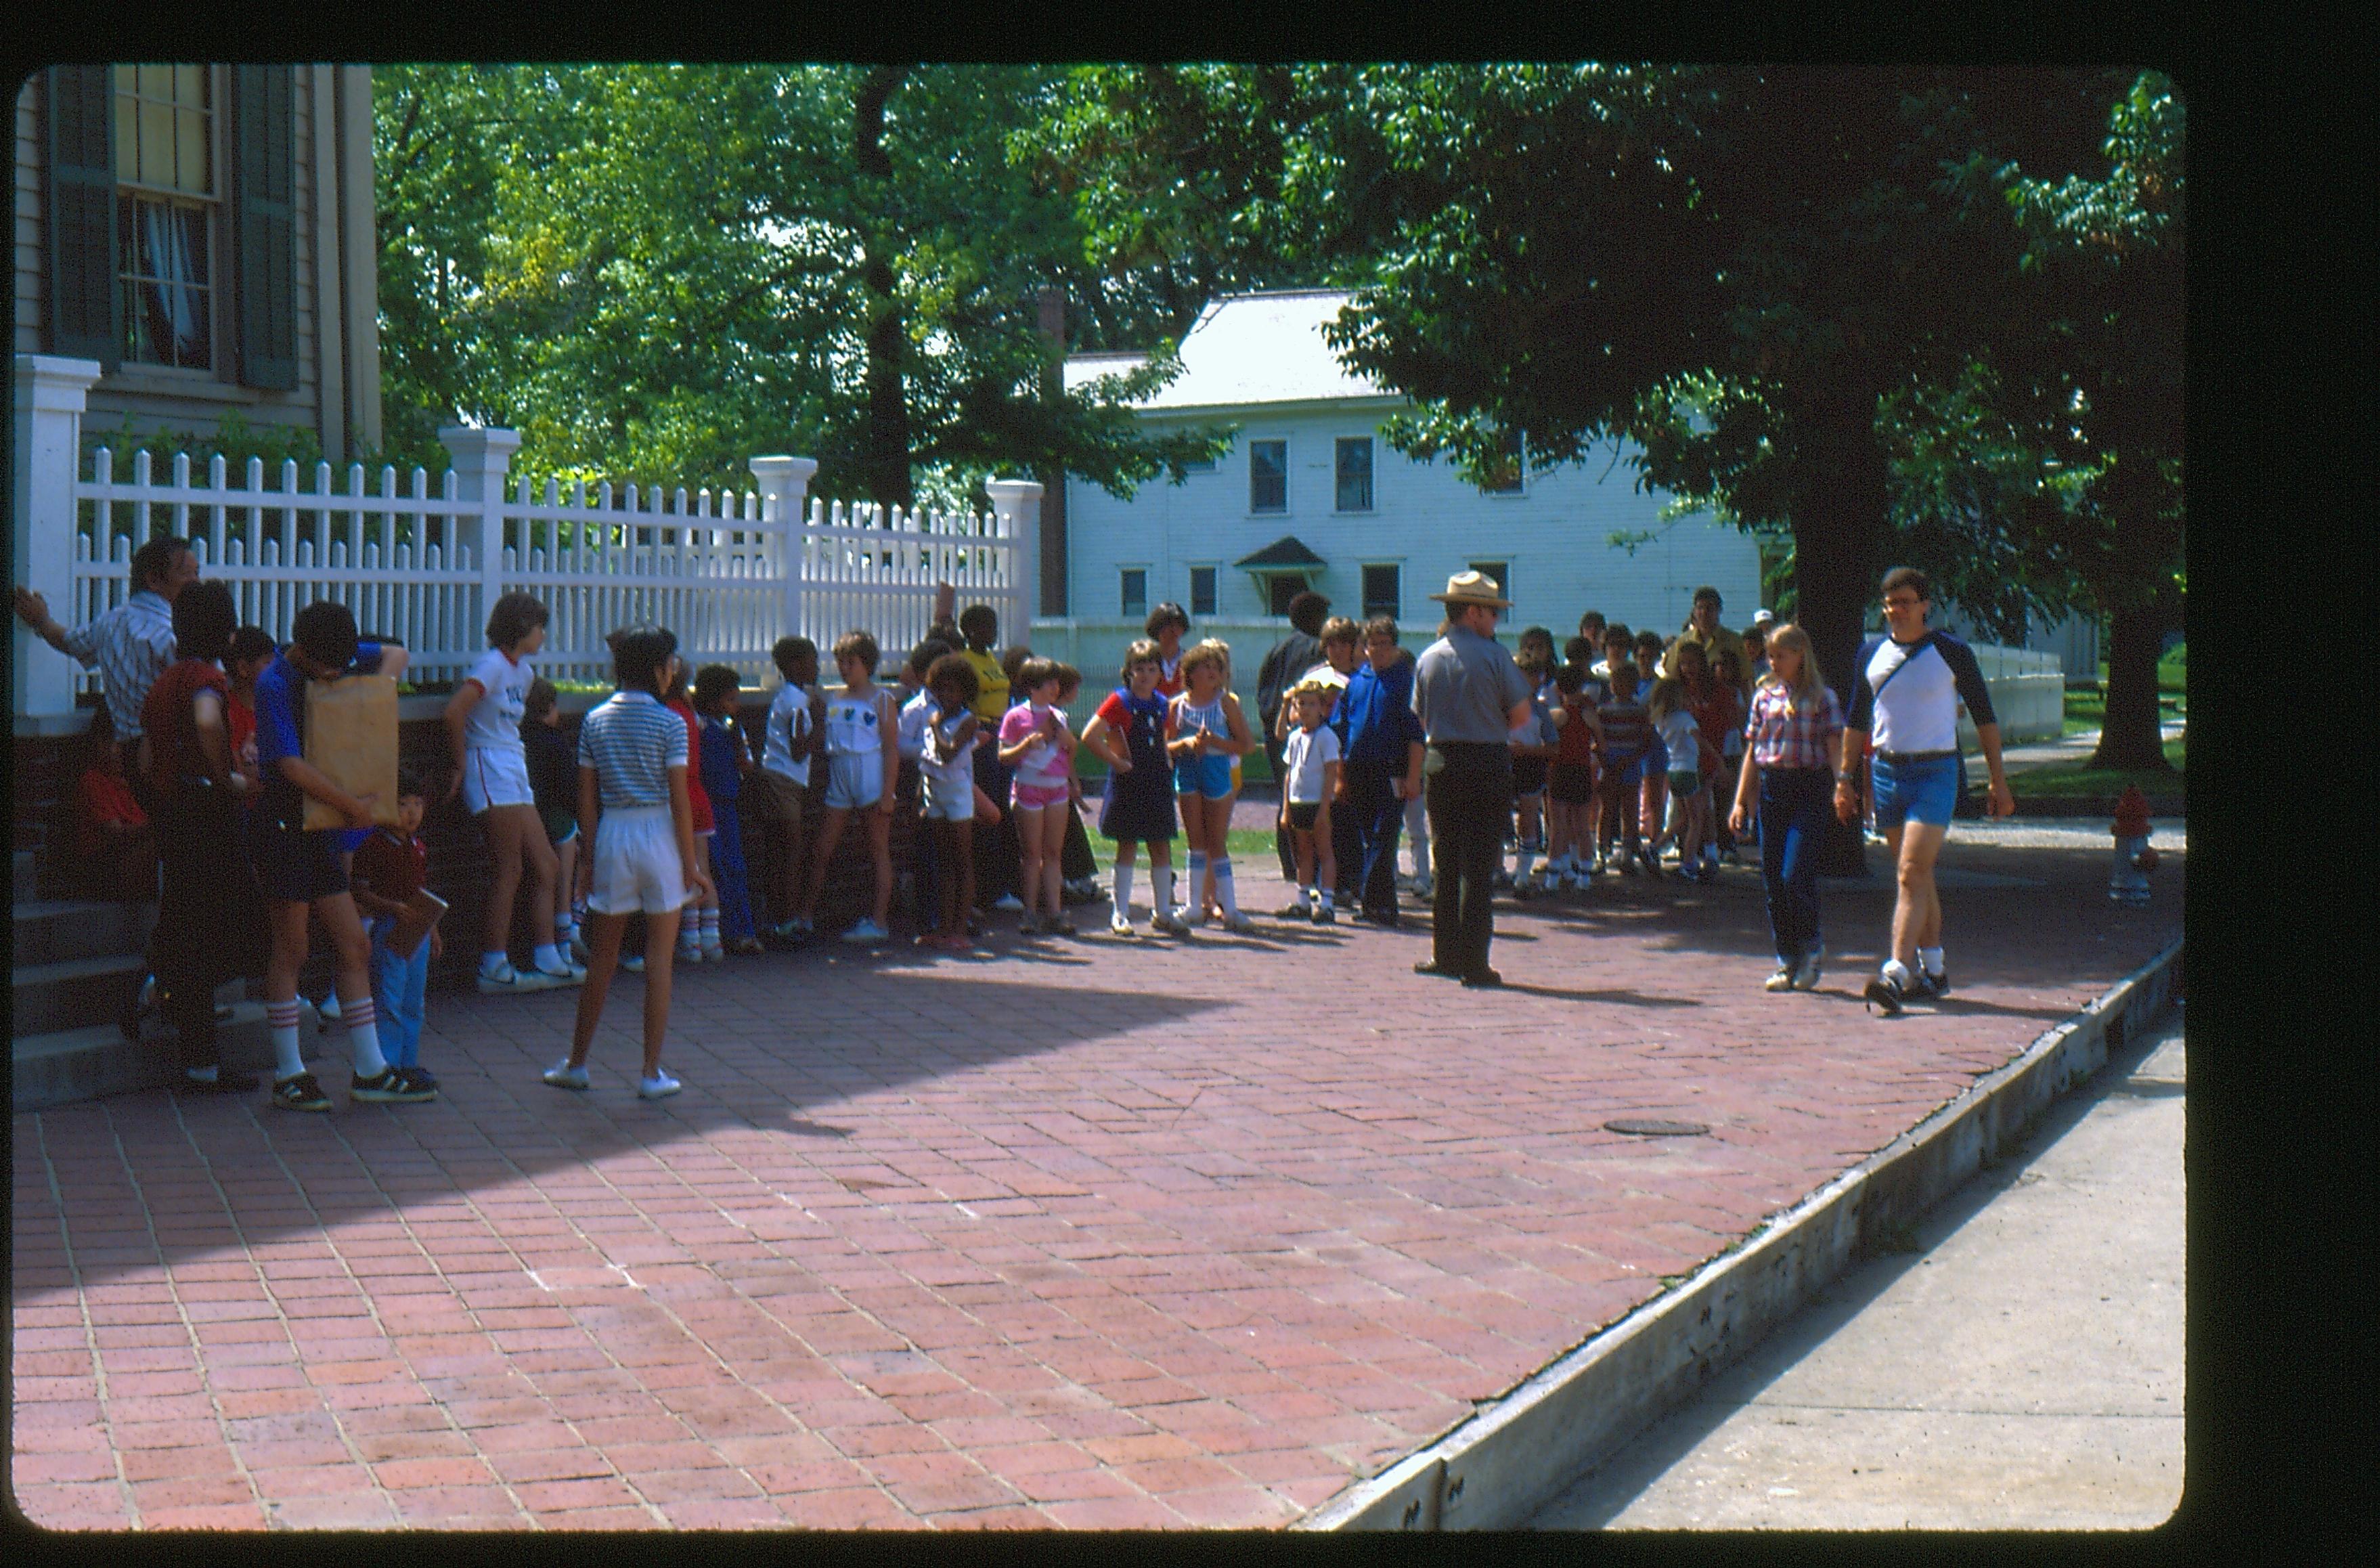 Visitors in a line heading south from the Lincoln Home. A single ranger waits alongside the group. Fire hydrant visible on brick plaza to far right of the photo. Cook house in background.